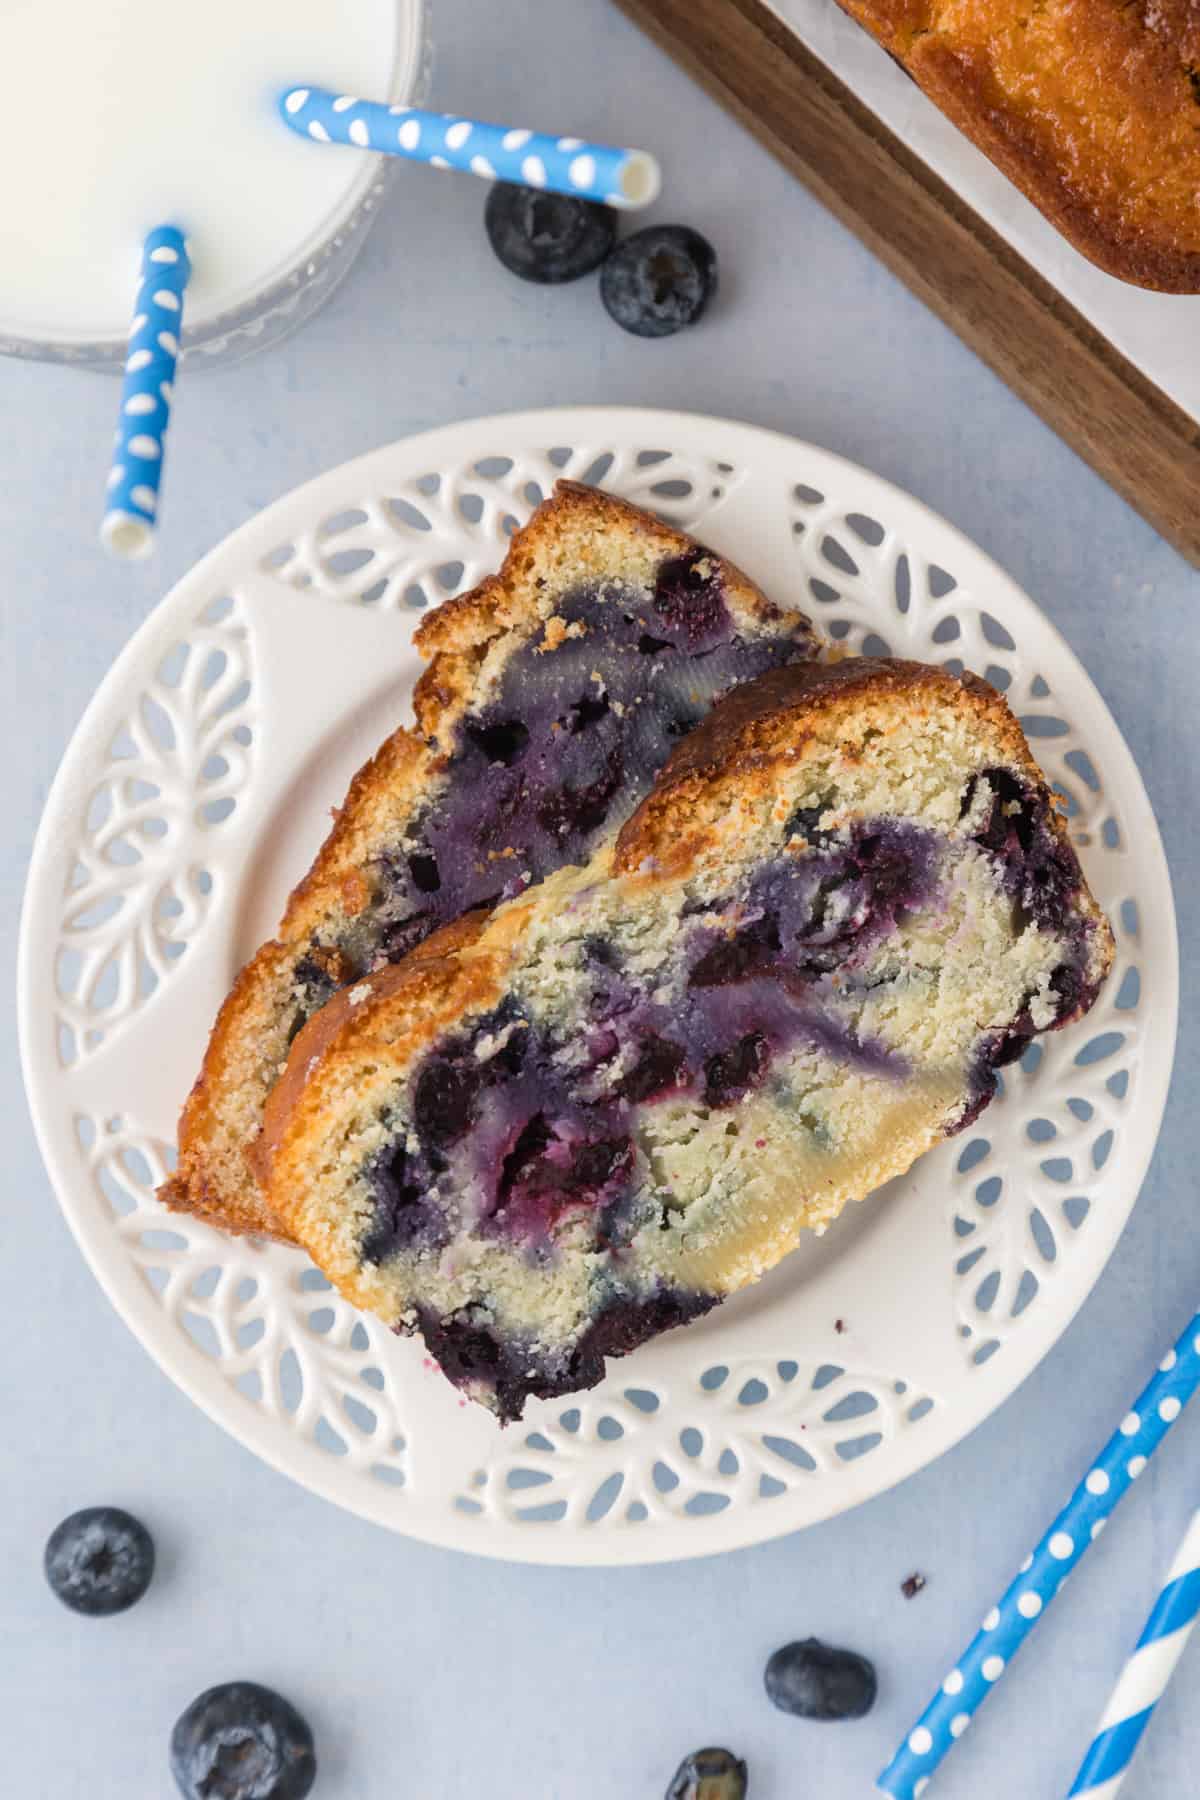 A slice of blueberry bread on a plate.